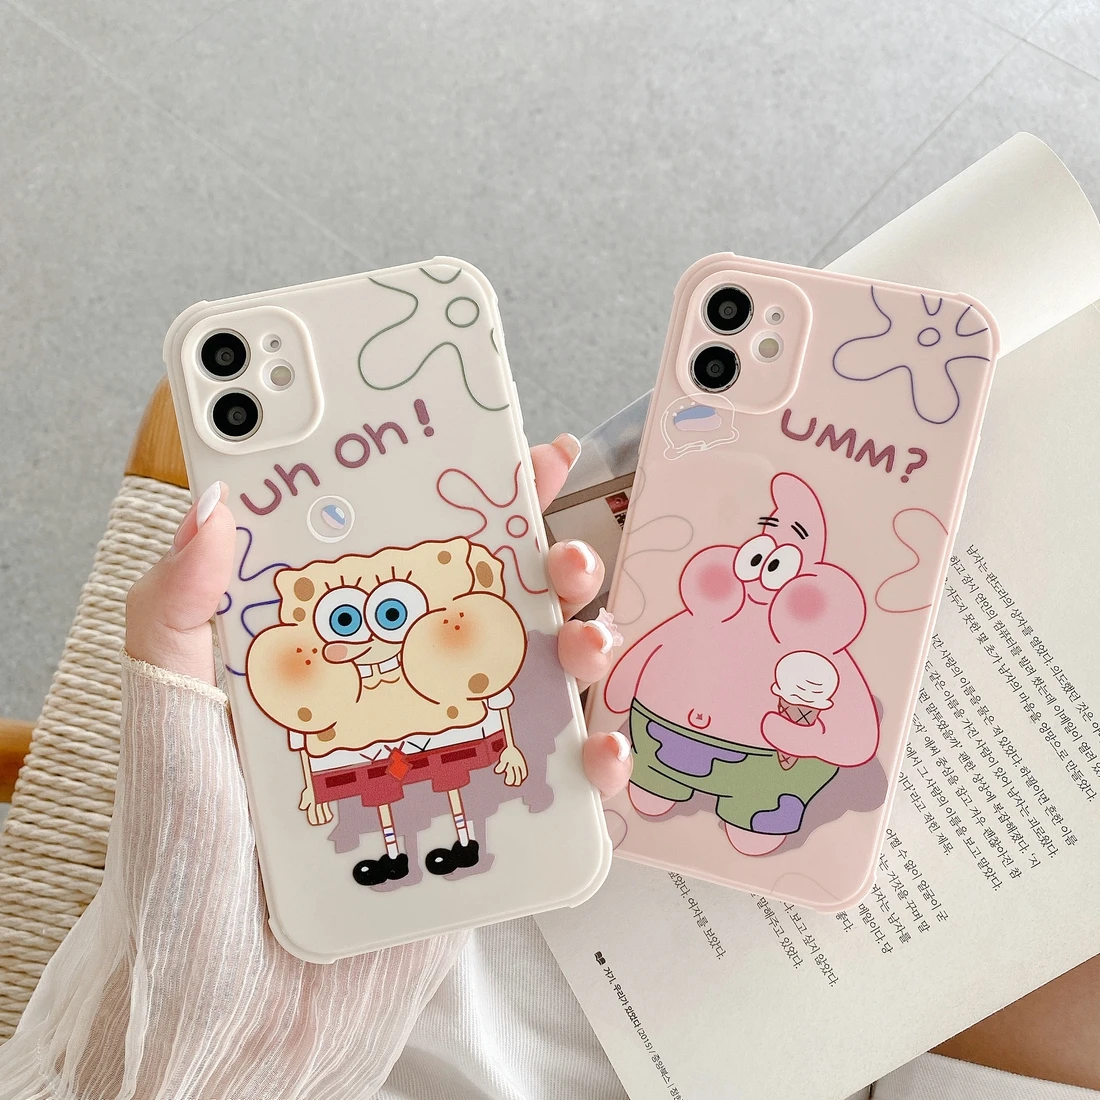 

Cartoon pattern case for iphone 12promax 11 12 11promax X XSMax XR 7 8 7Plus soft protect shell